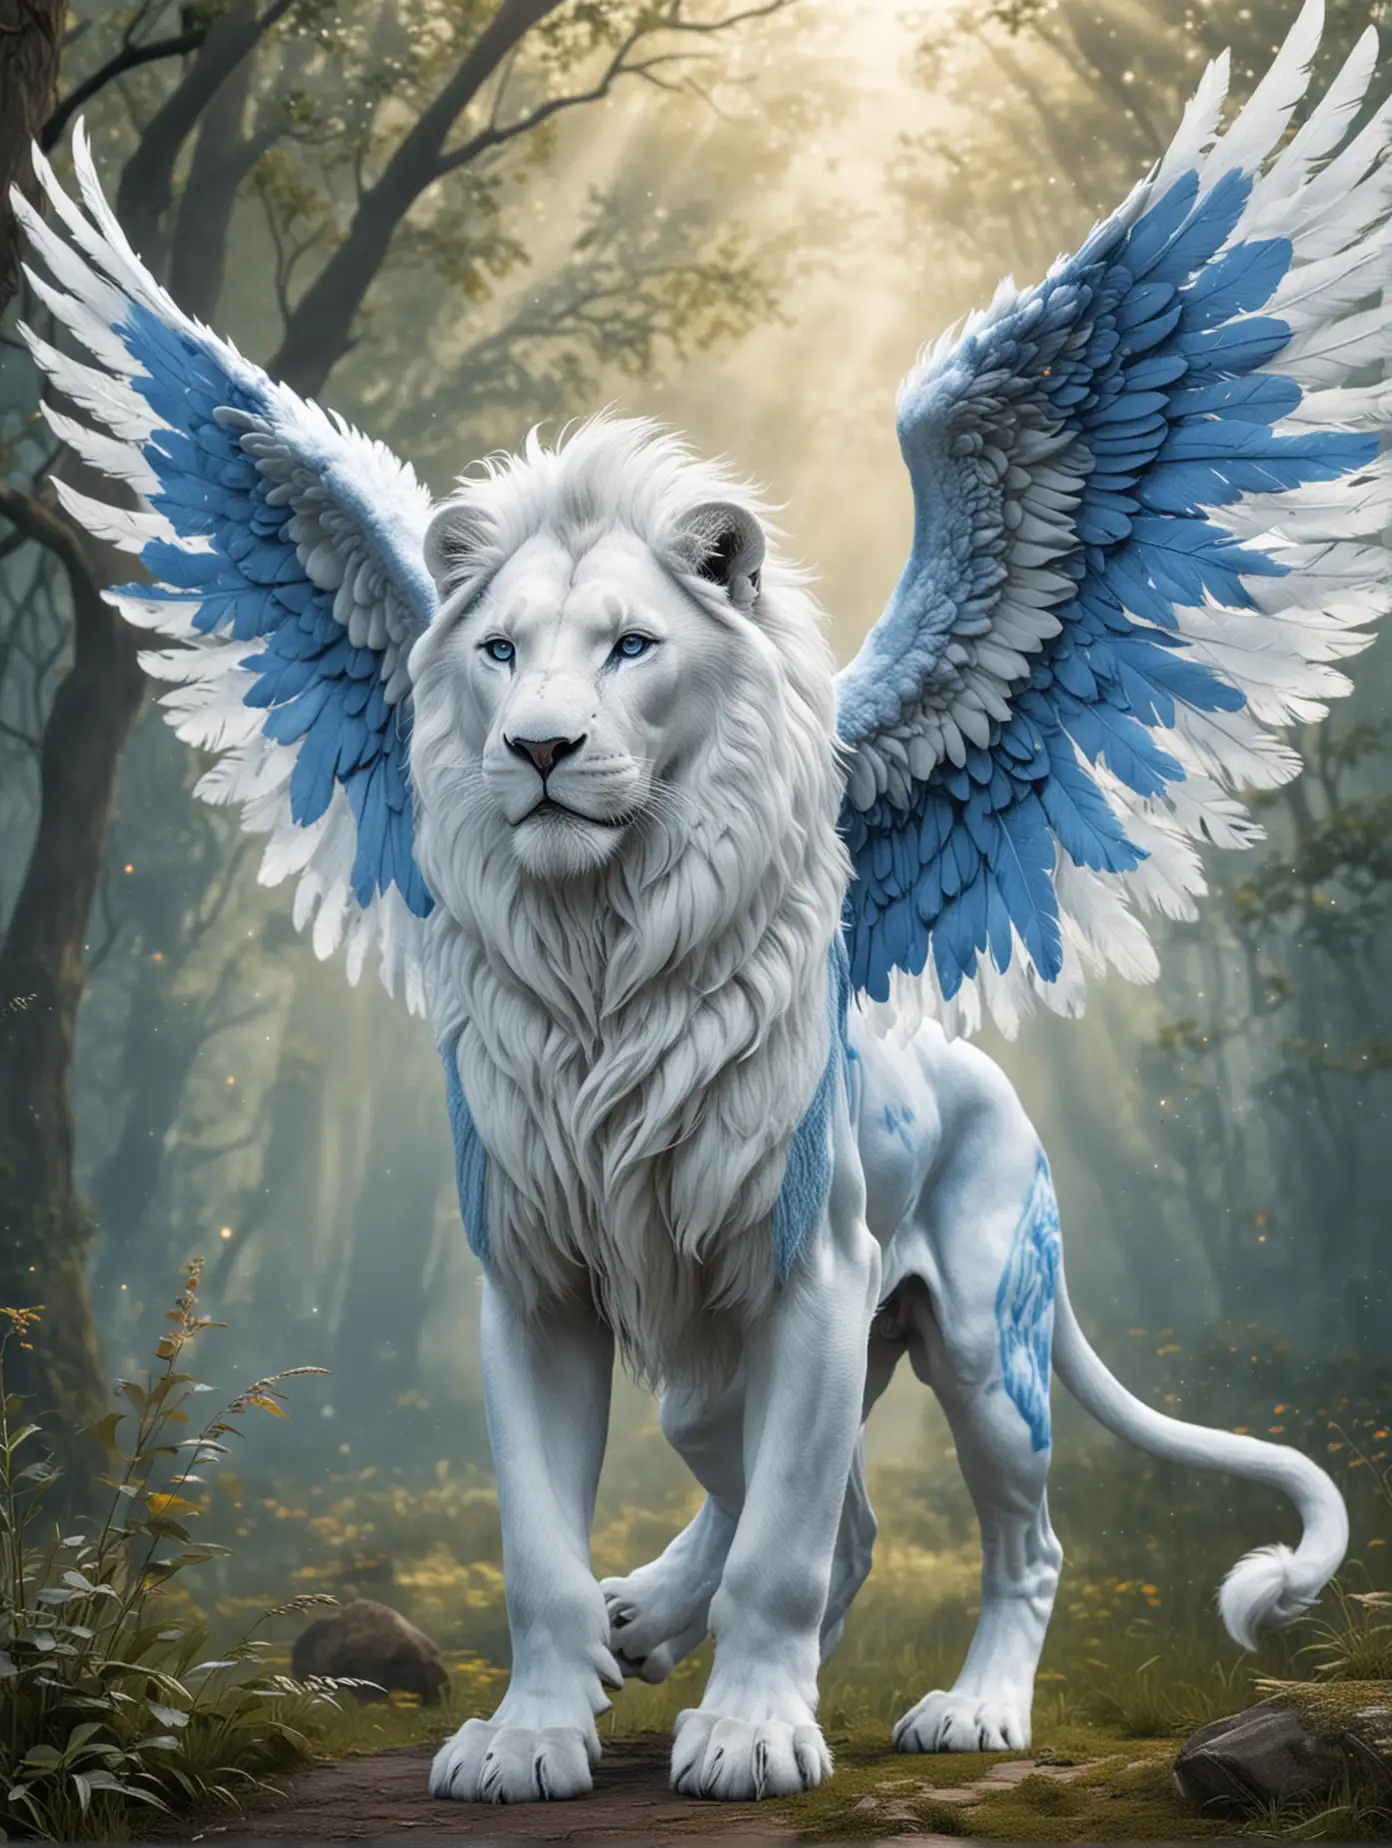 Majestic Winged BlueWhite Lion in Fantasy Realm